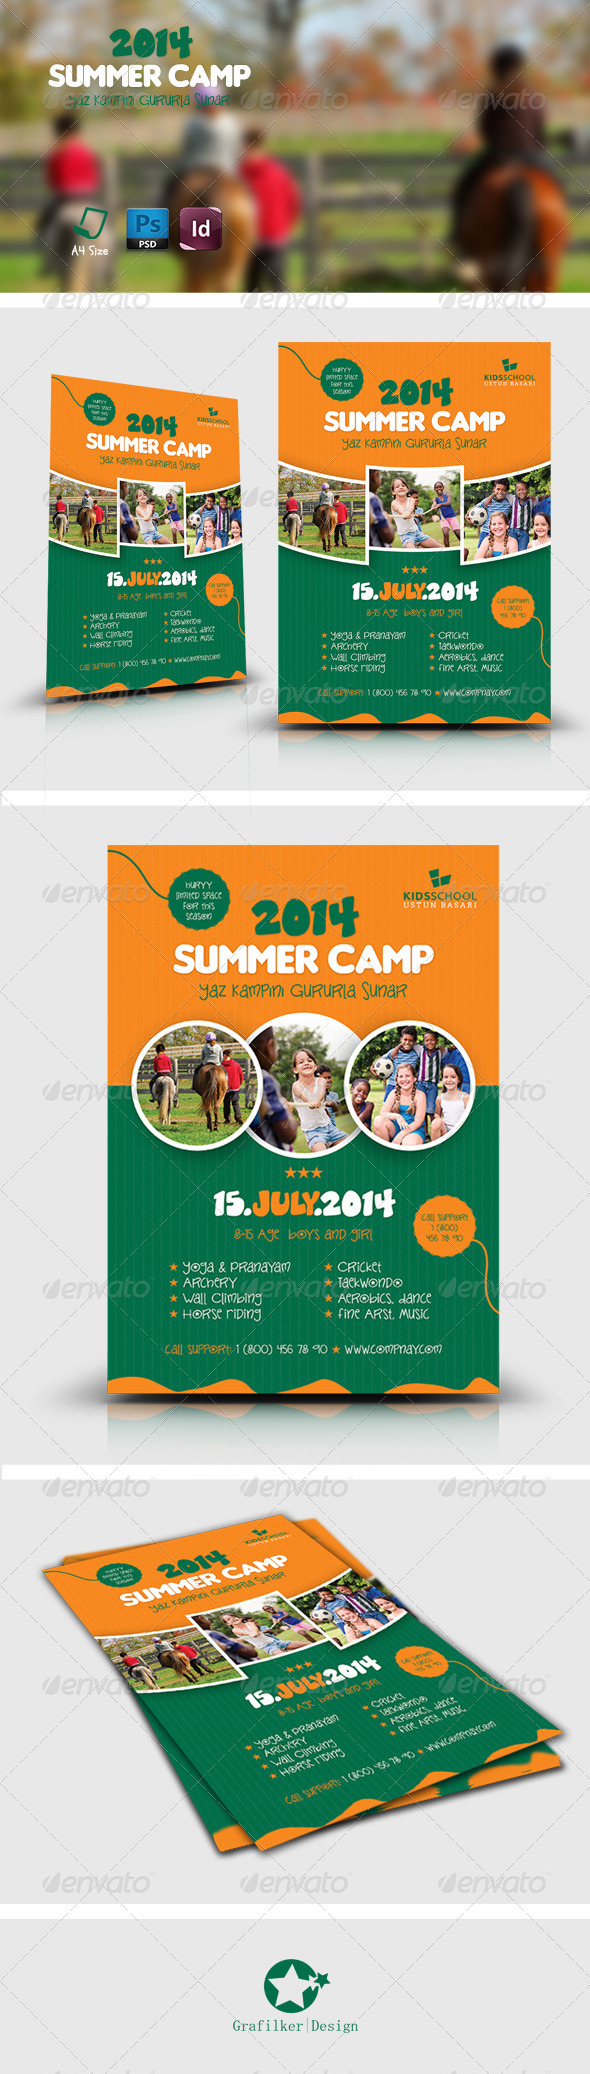 Summer Camp Flyer Templates Within Sports Camp Flyer Template